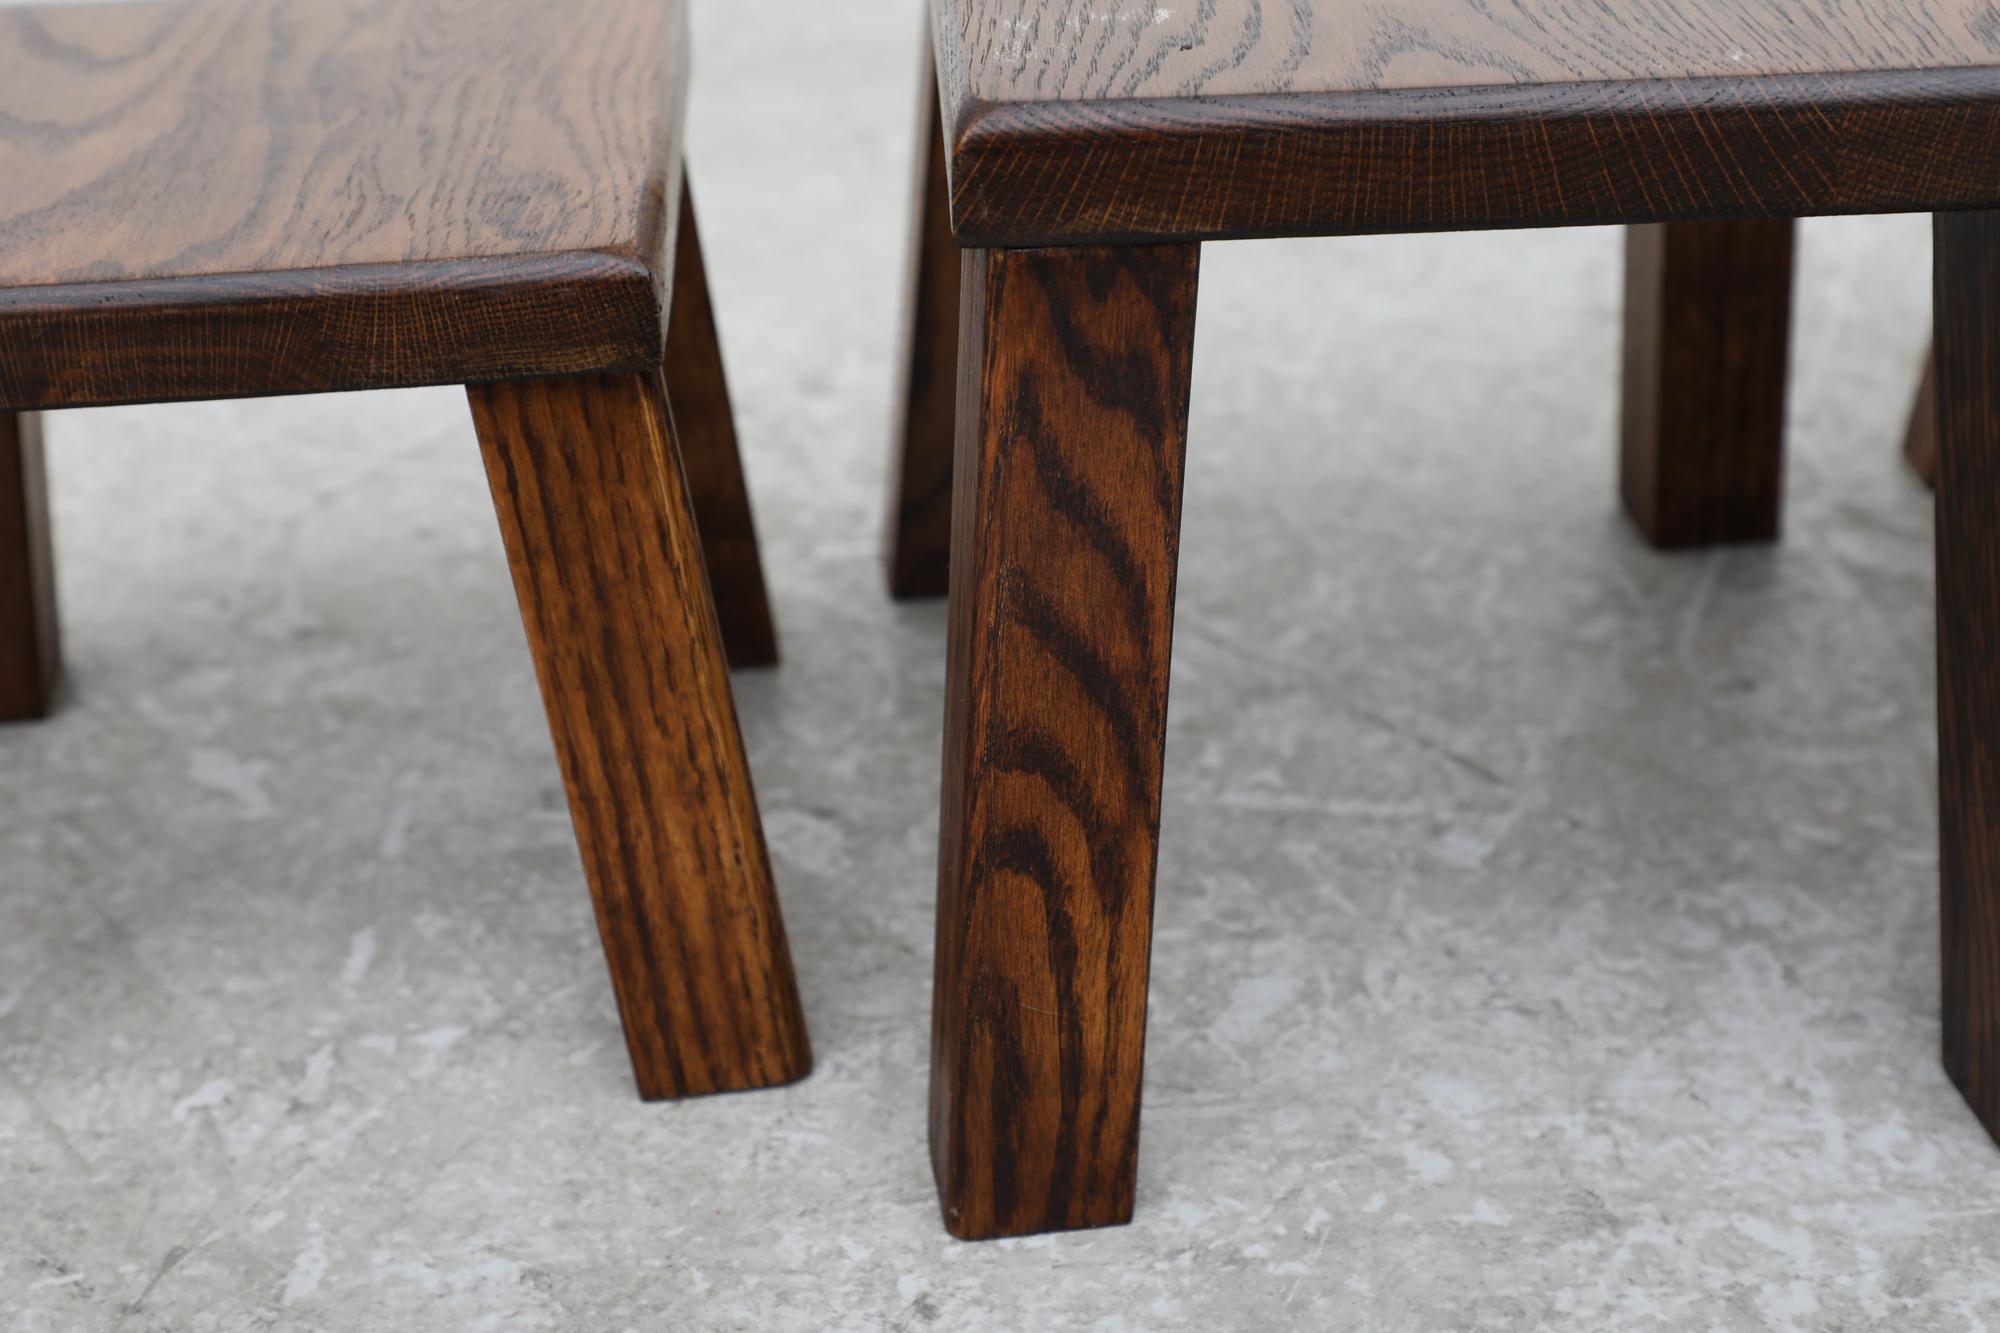 Pierre Chapo Inspired Dark Oak Brutalist Nesting Tables w/ Thick Angled Legs For Sale 7